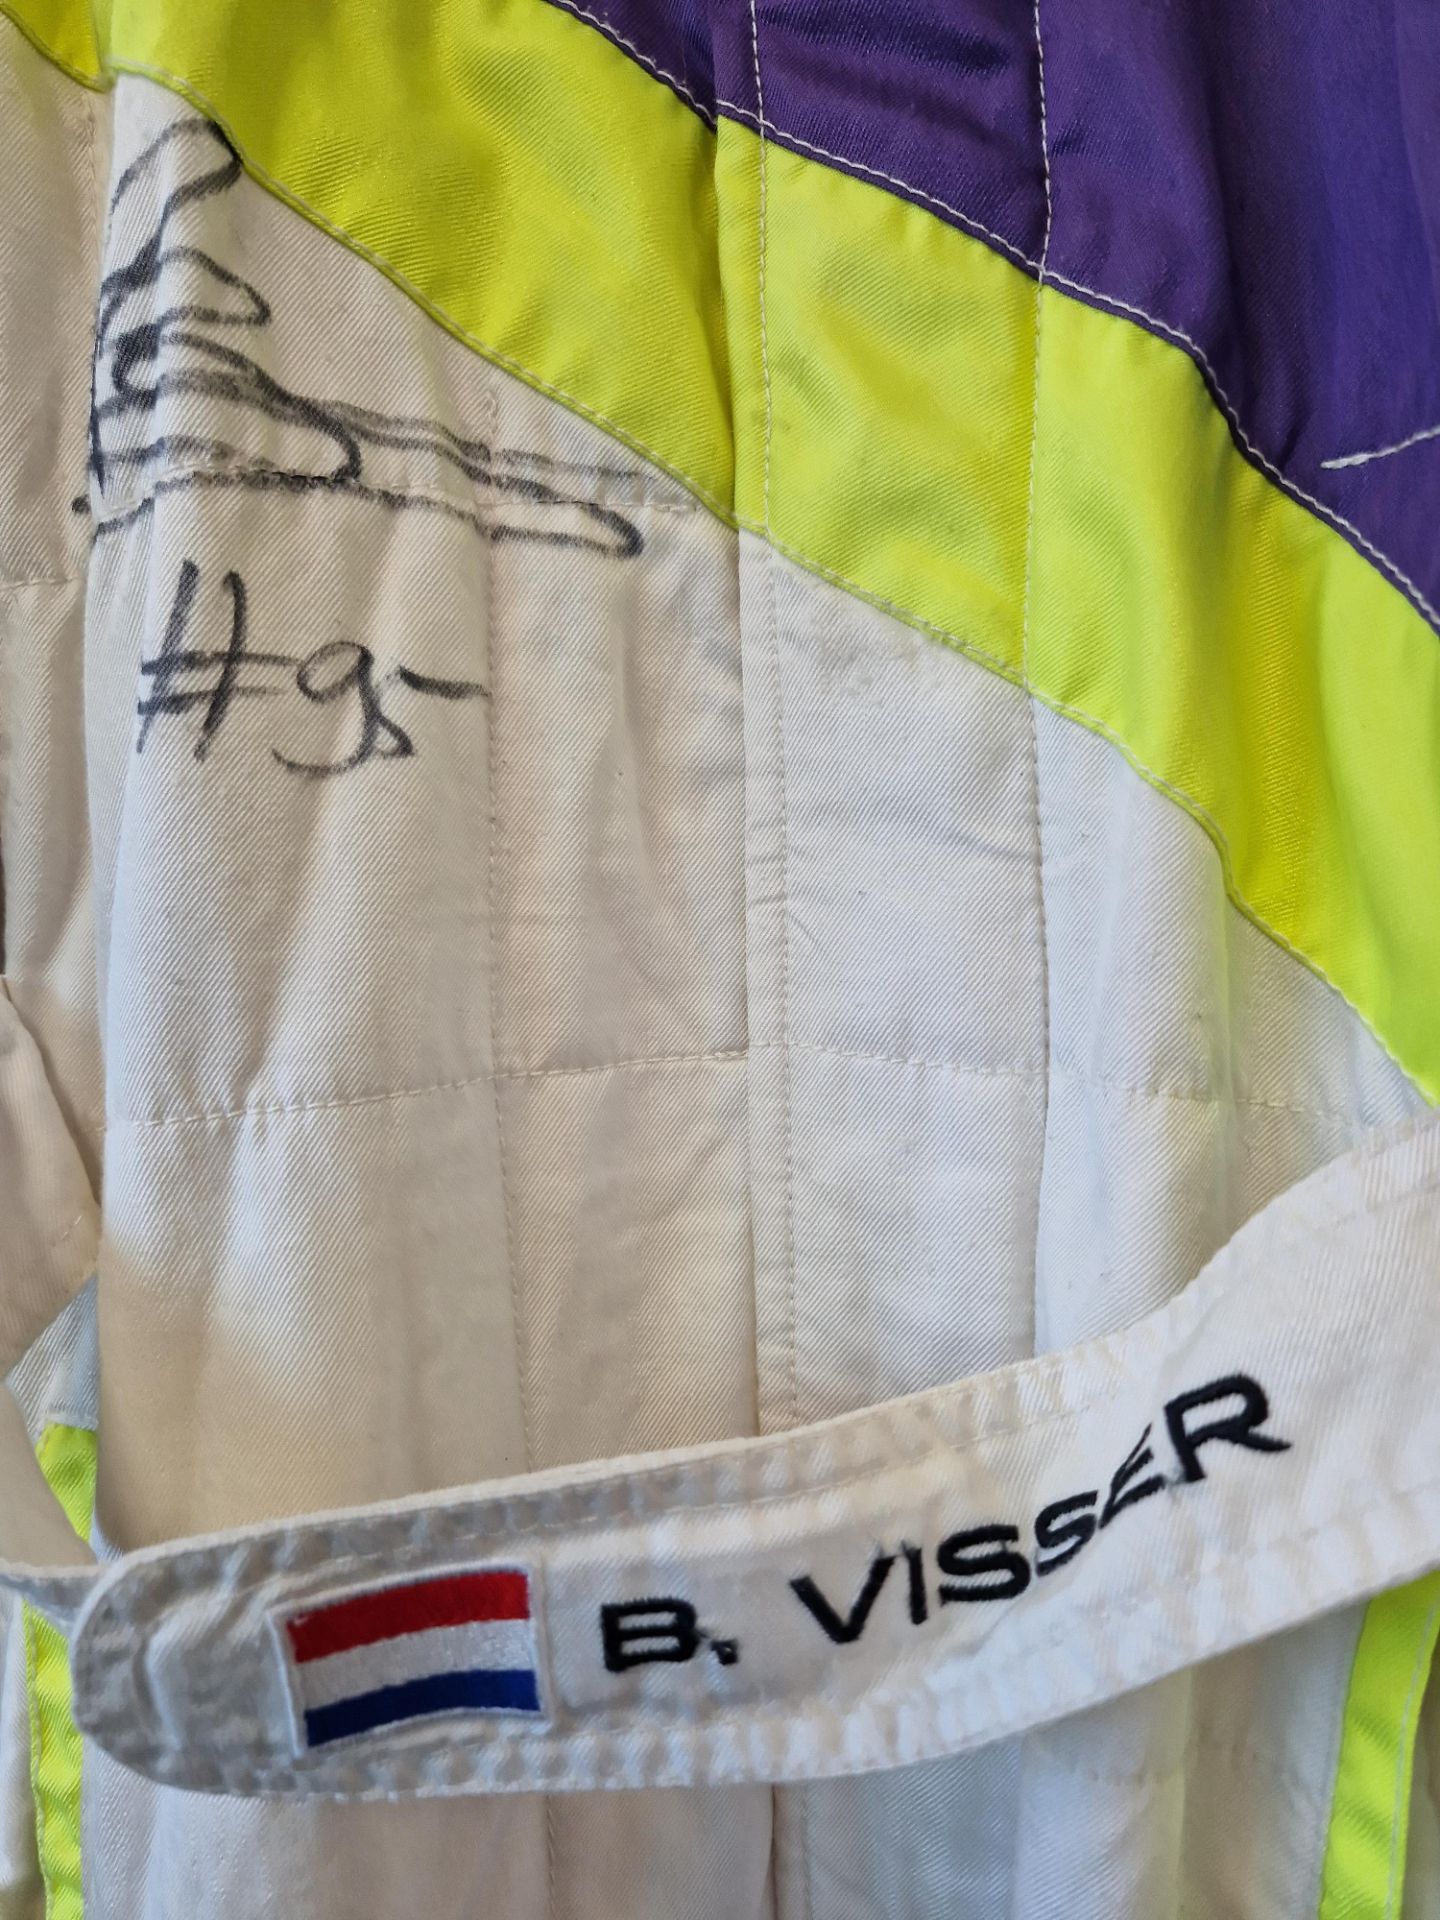 One PUMA FIA approved Race Suit (Size - Made to Measure) worn by Beitske Visser and signed by her - Image 2 of 2